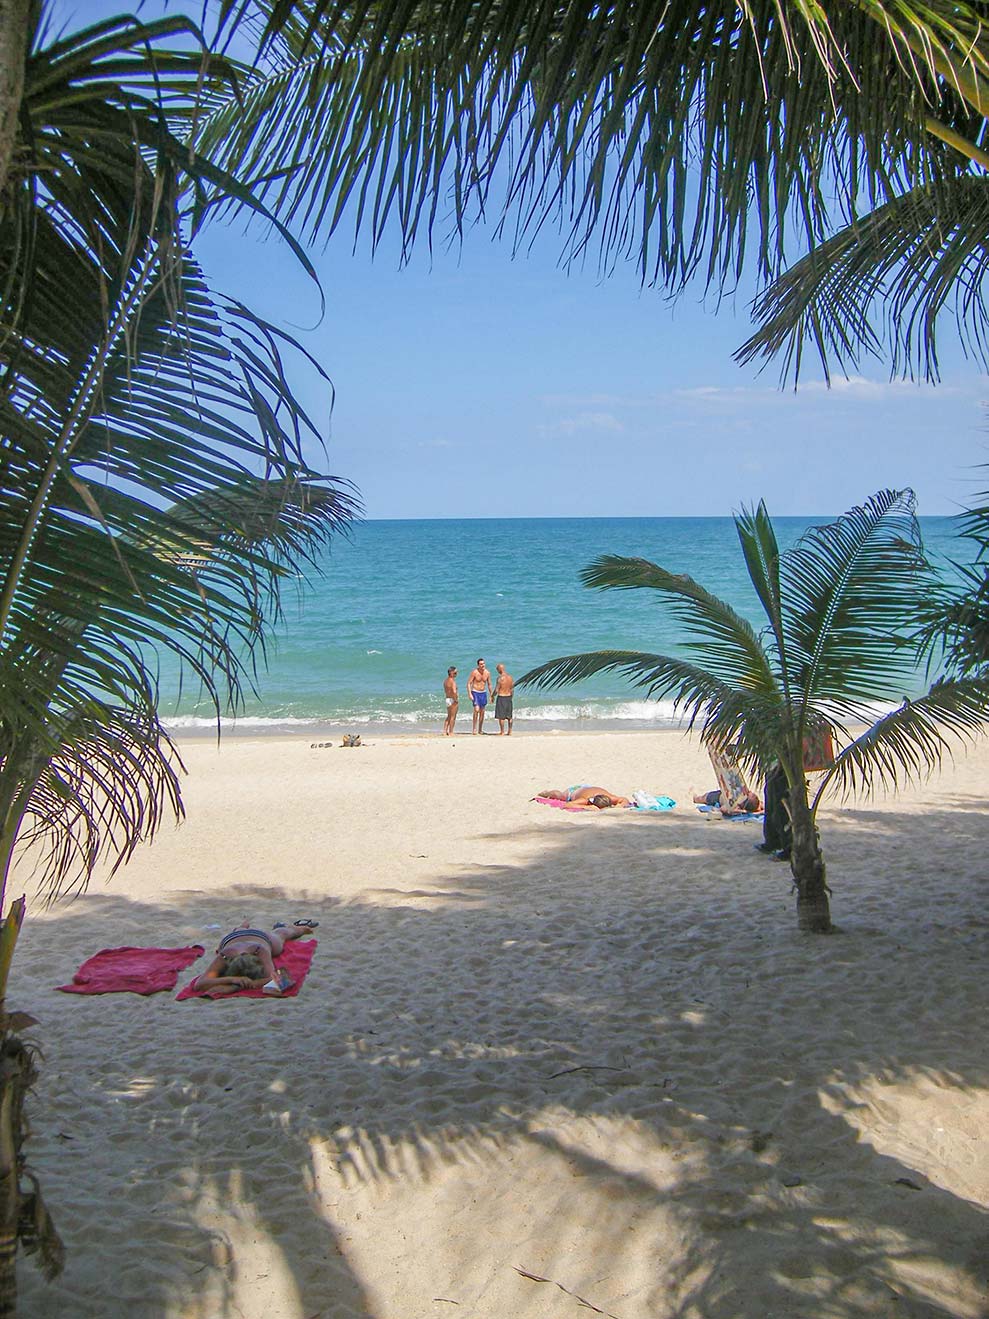 Koh Samui : The most famous beaches